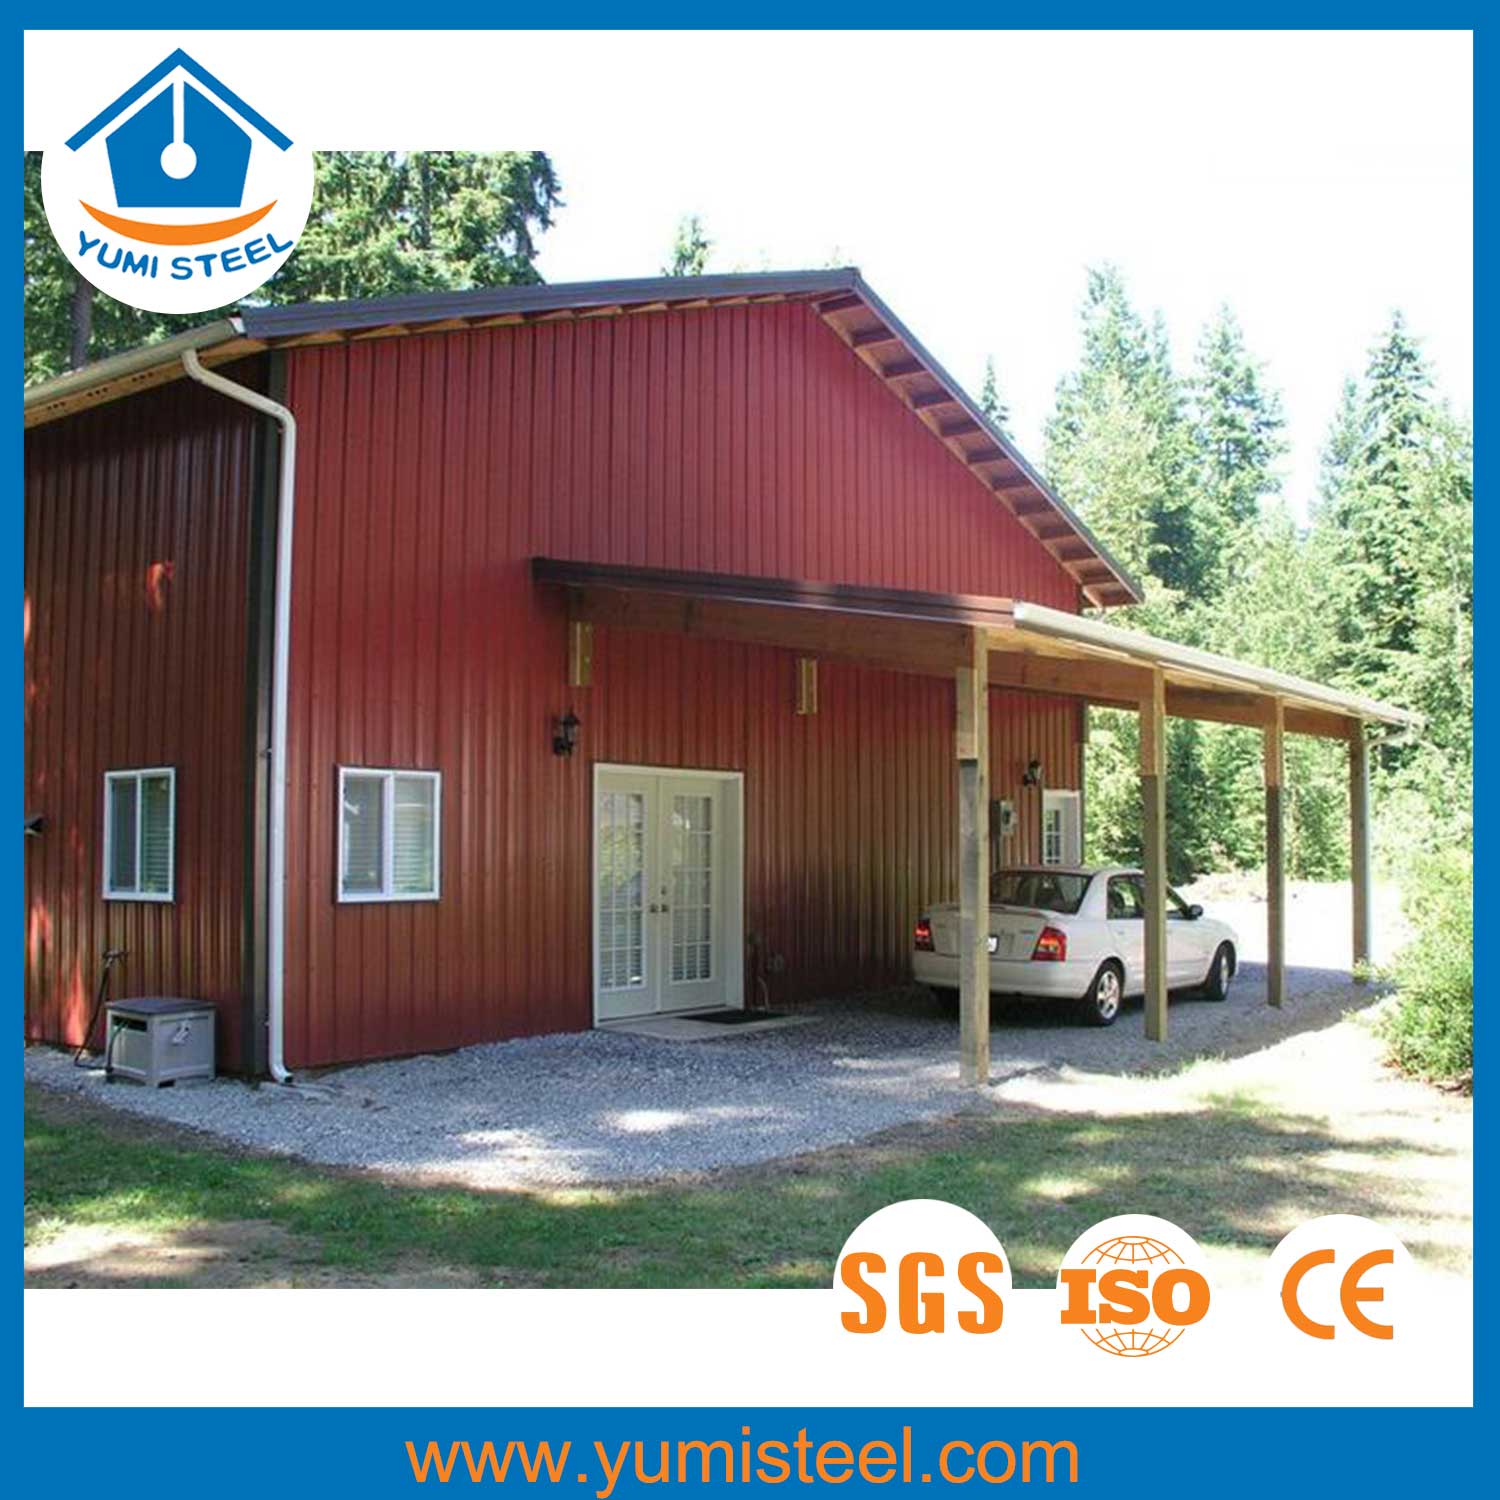 Metal Roofing Sheets Cladding Garage Shed Roof 